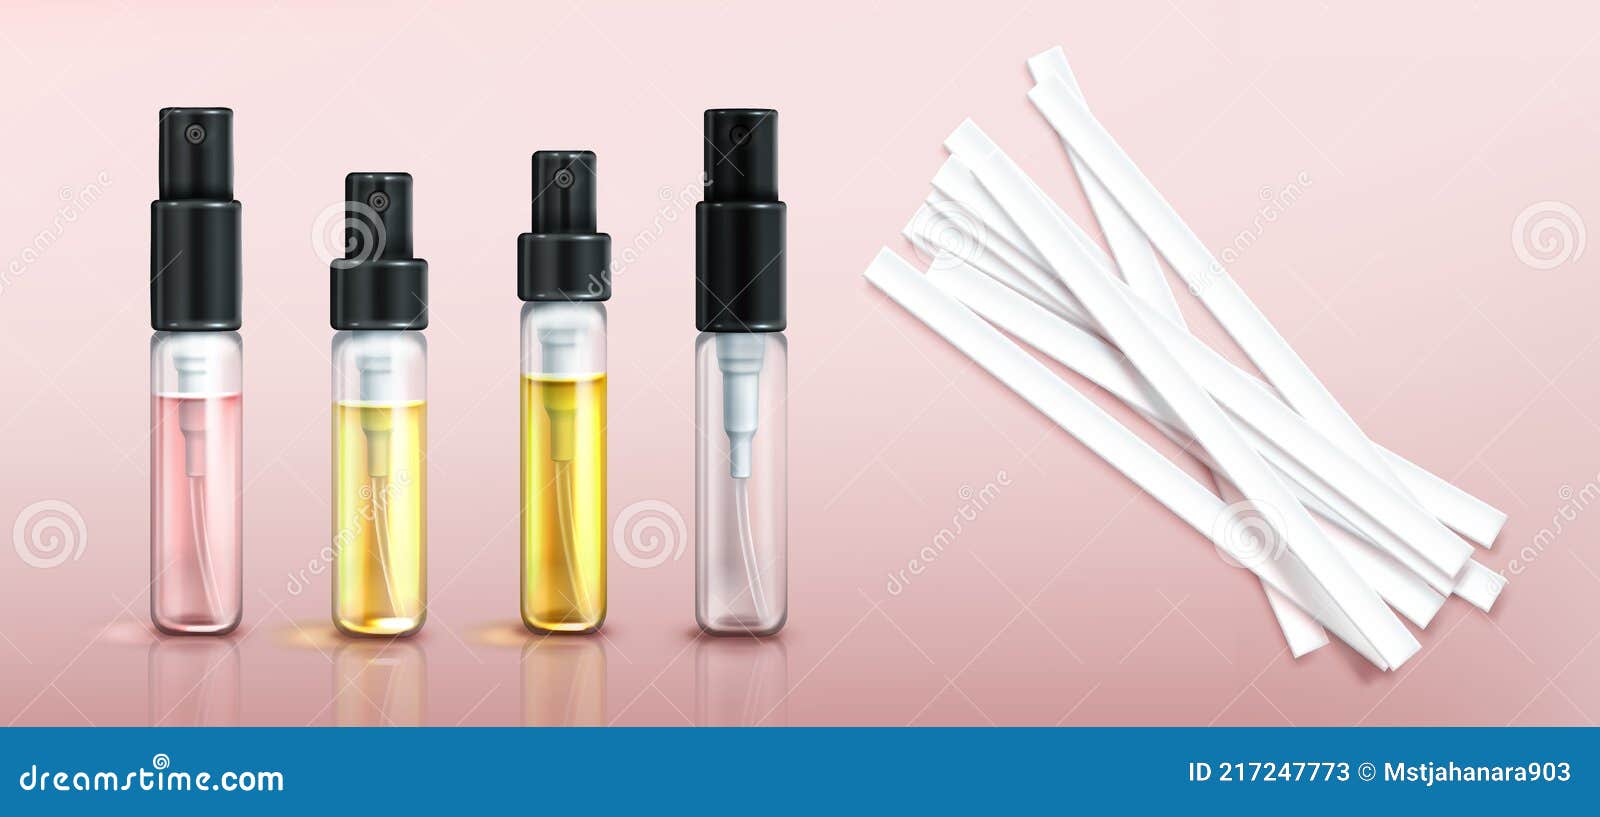 Perfume Tester Mockup Template On Isolated White Background, Travel ...